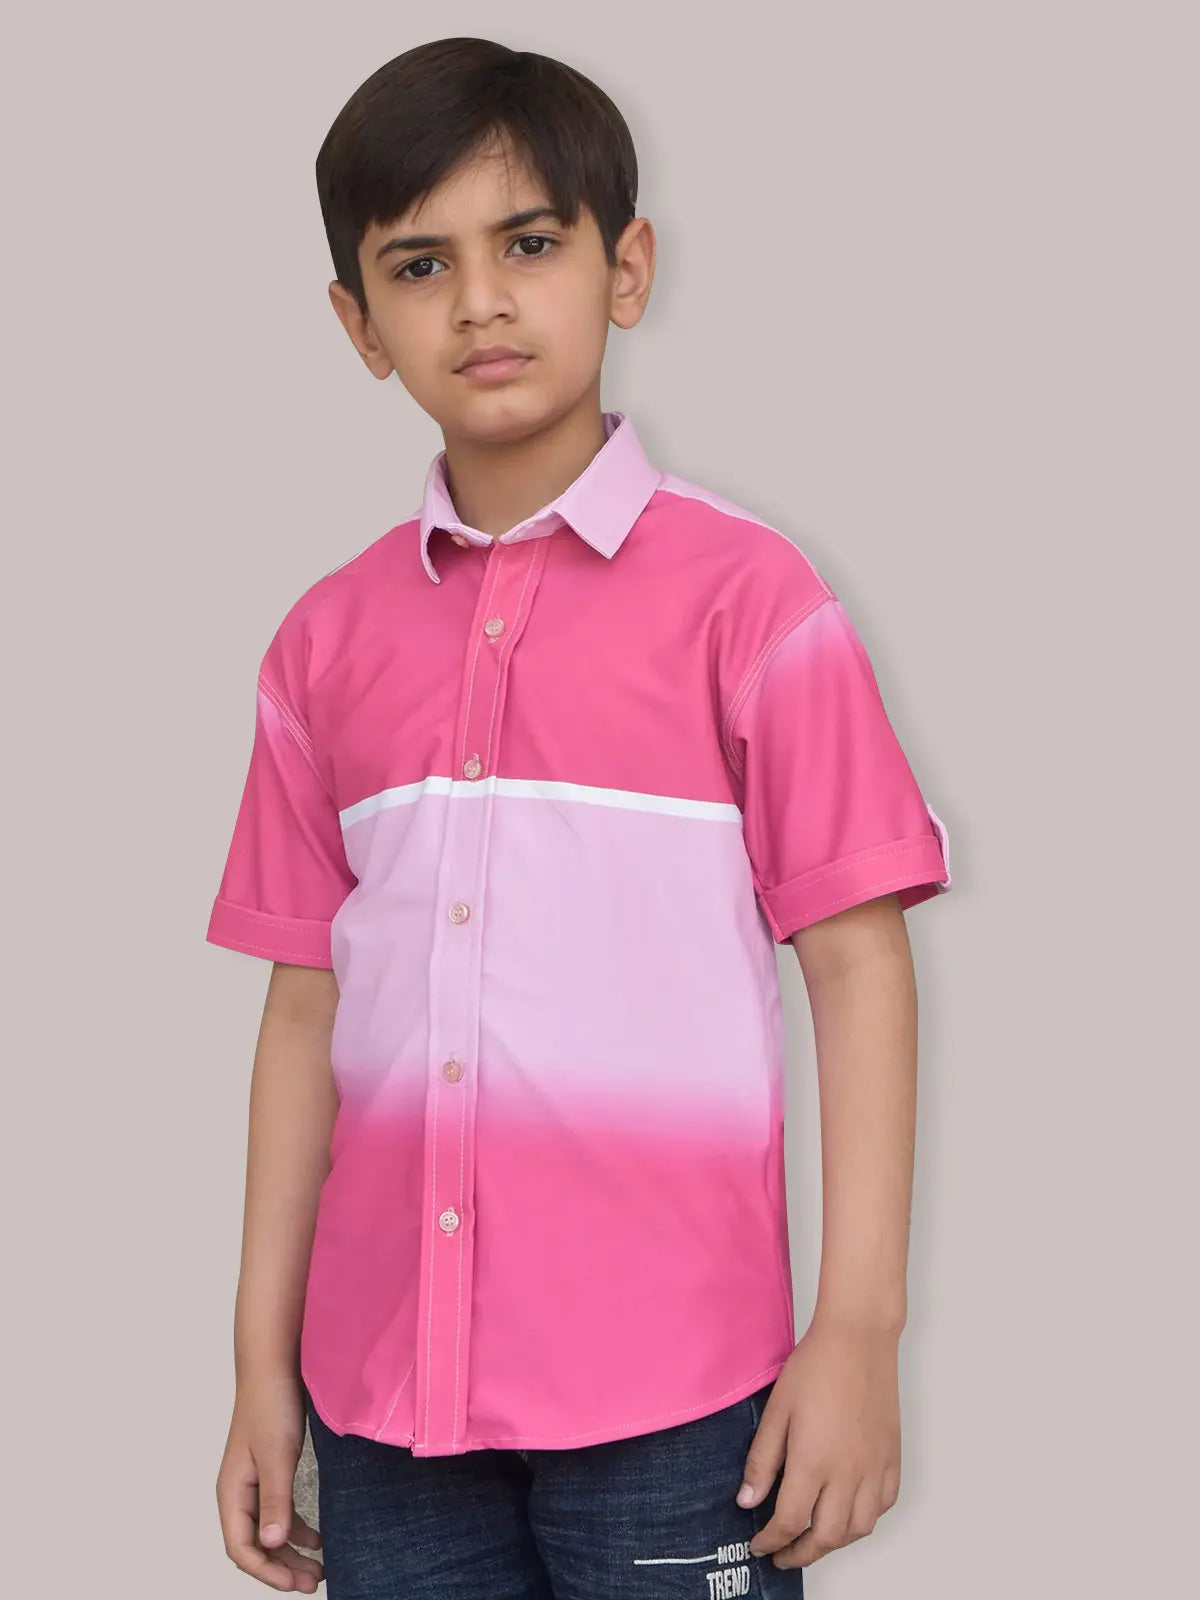 Louis Vicaci Super Stretchy Slim Fit Half Sleeve Lycra Casual Shirt For Kids-Pink-BE37